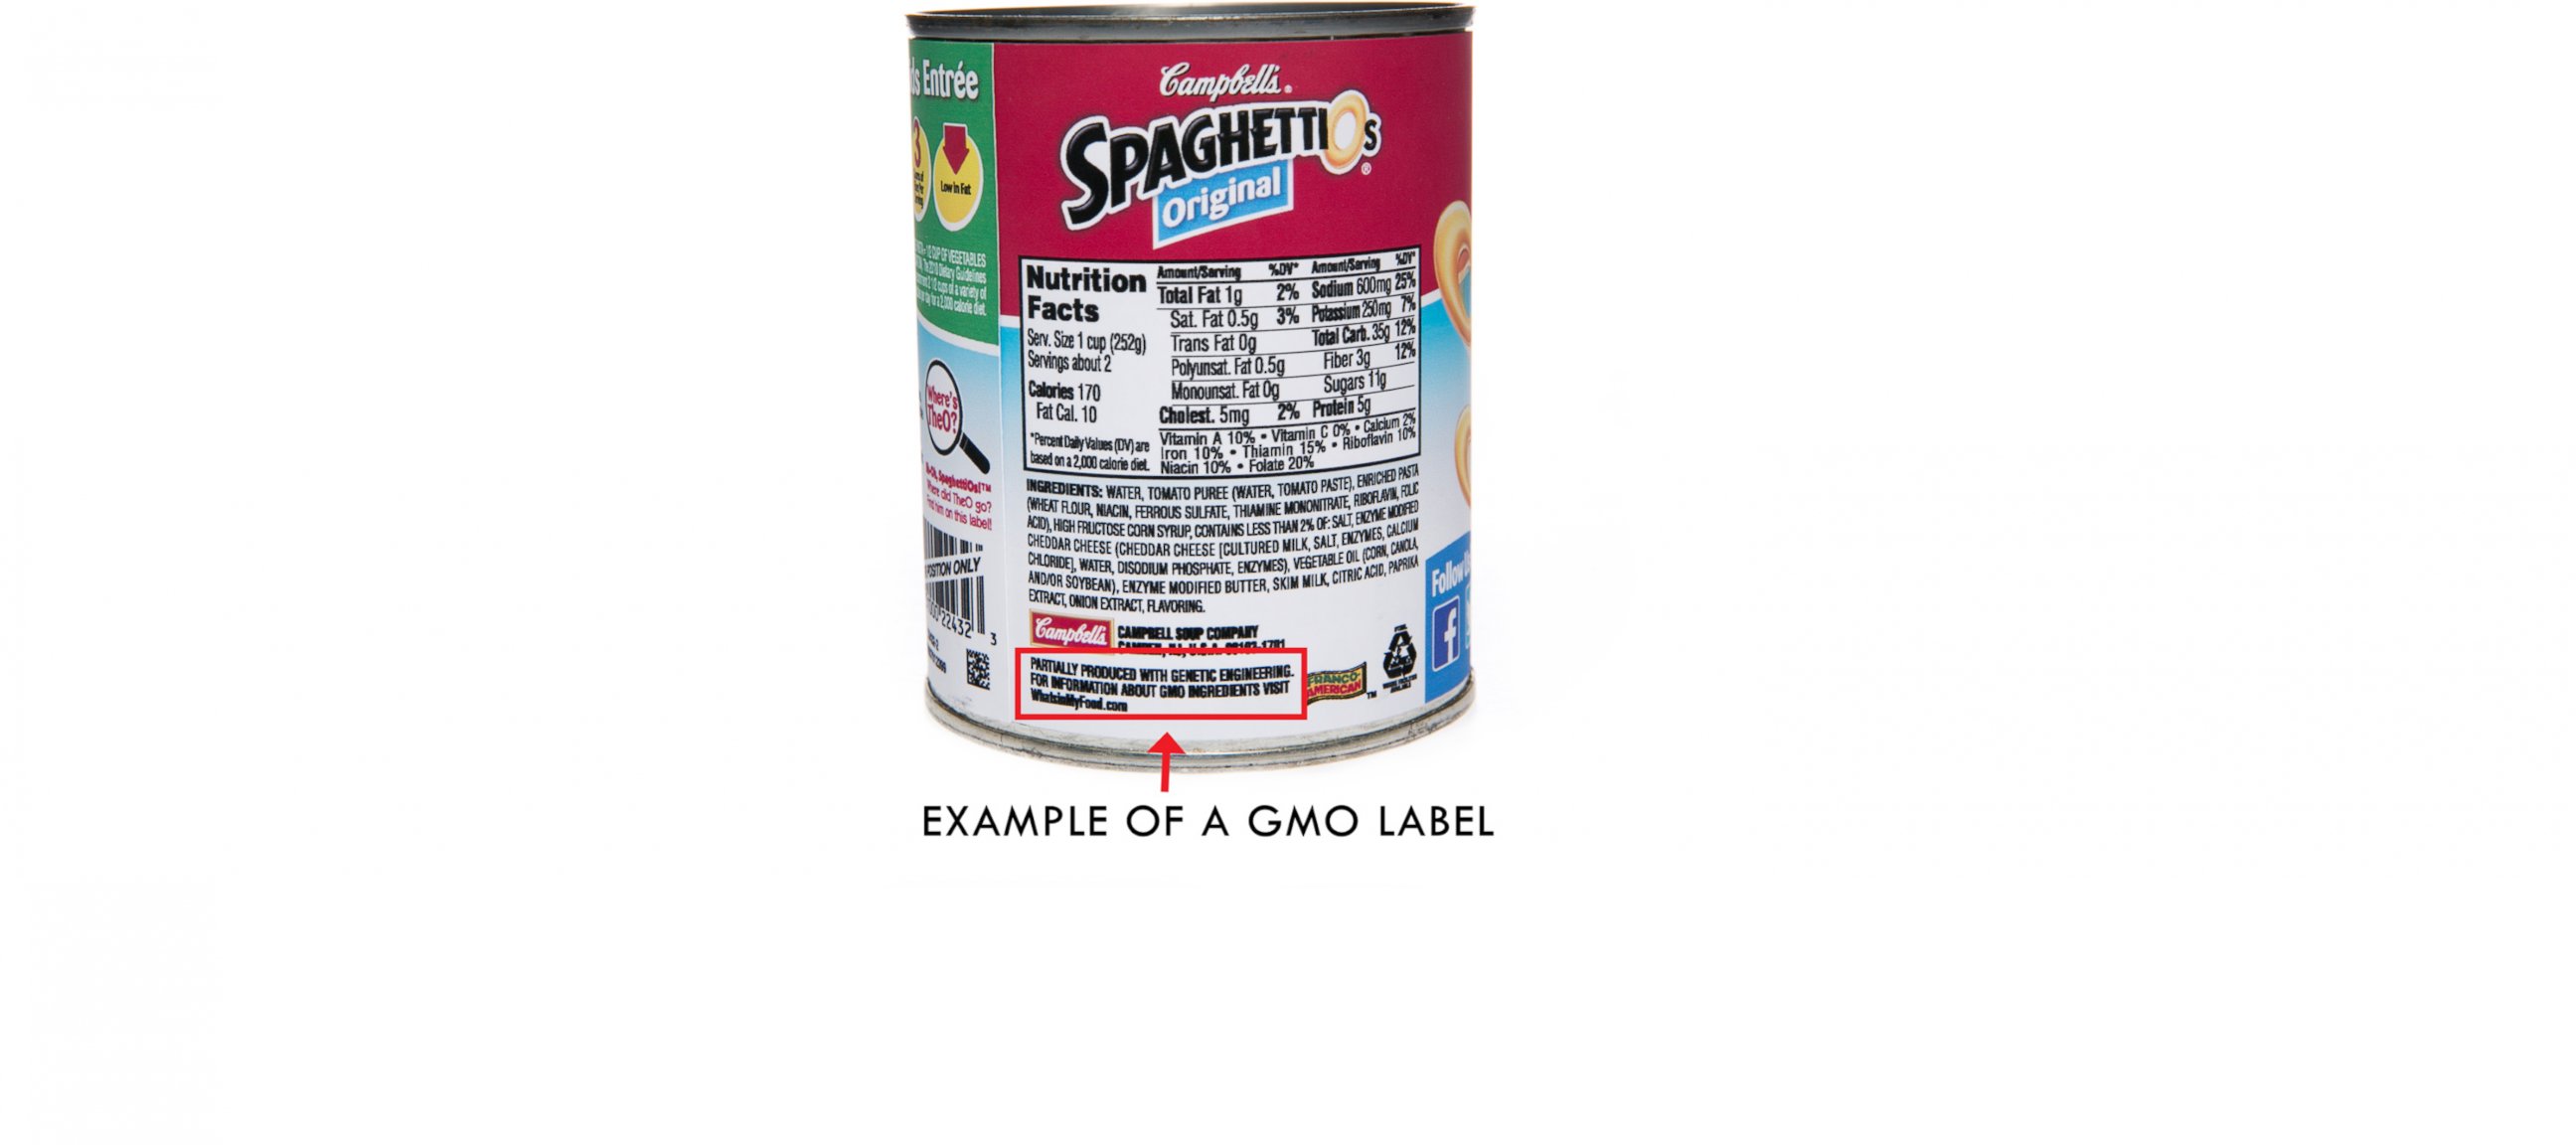 PHOTO: An undated handout image shows a GMO label on a Campbell's soup can.